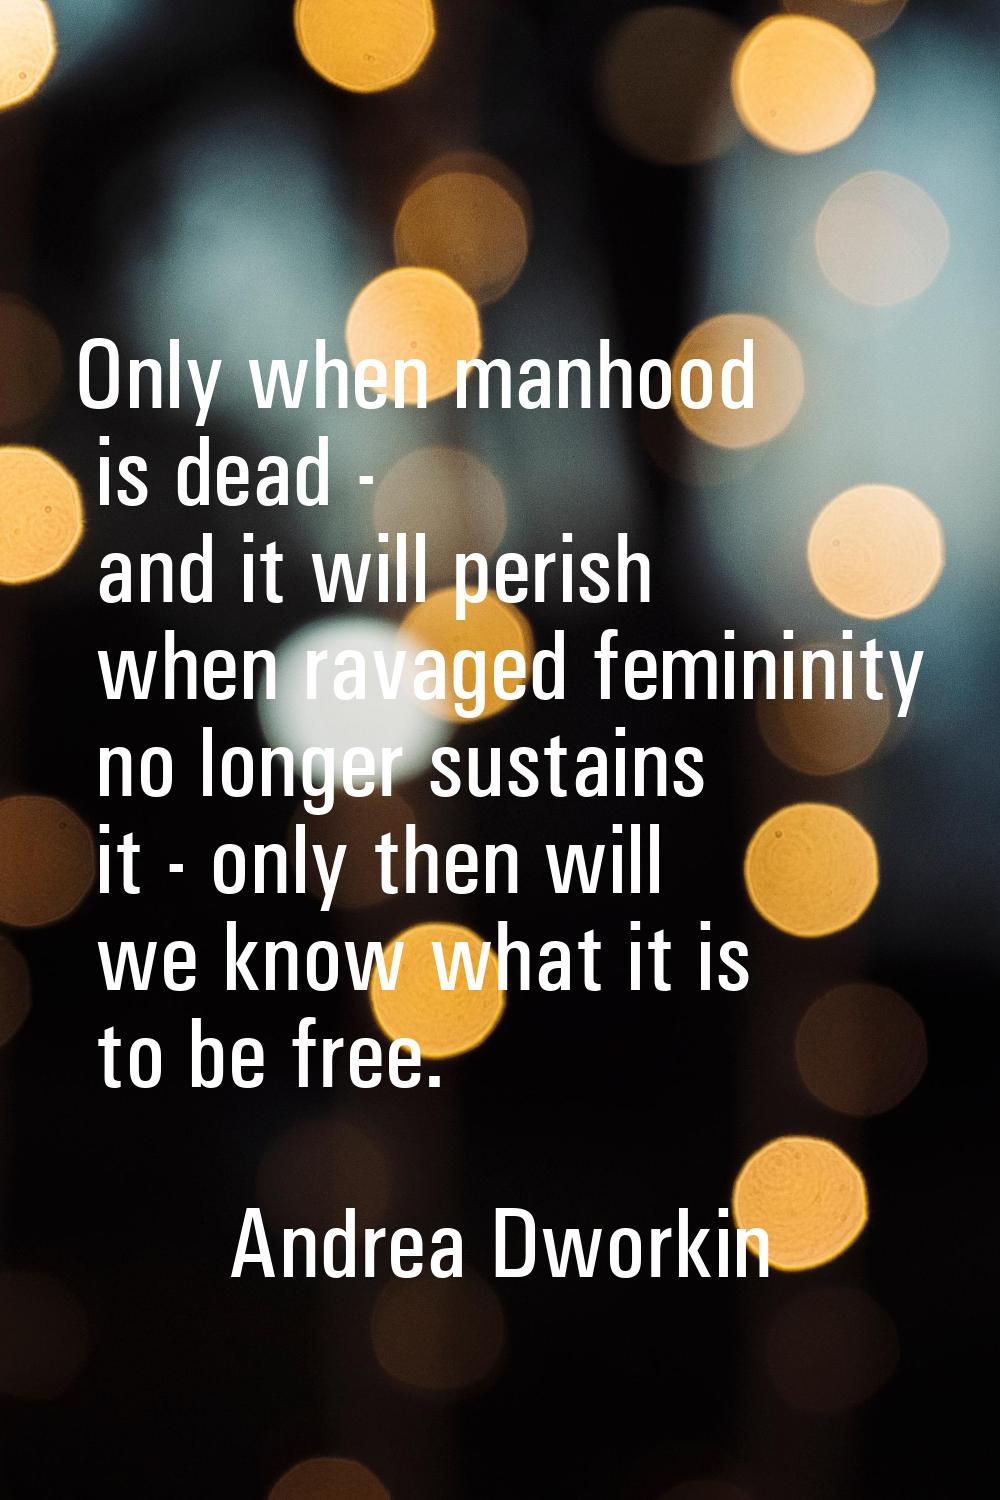 Only when manhood is dead - and it will perish when ravaged femininity no longer sustains it - only